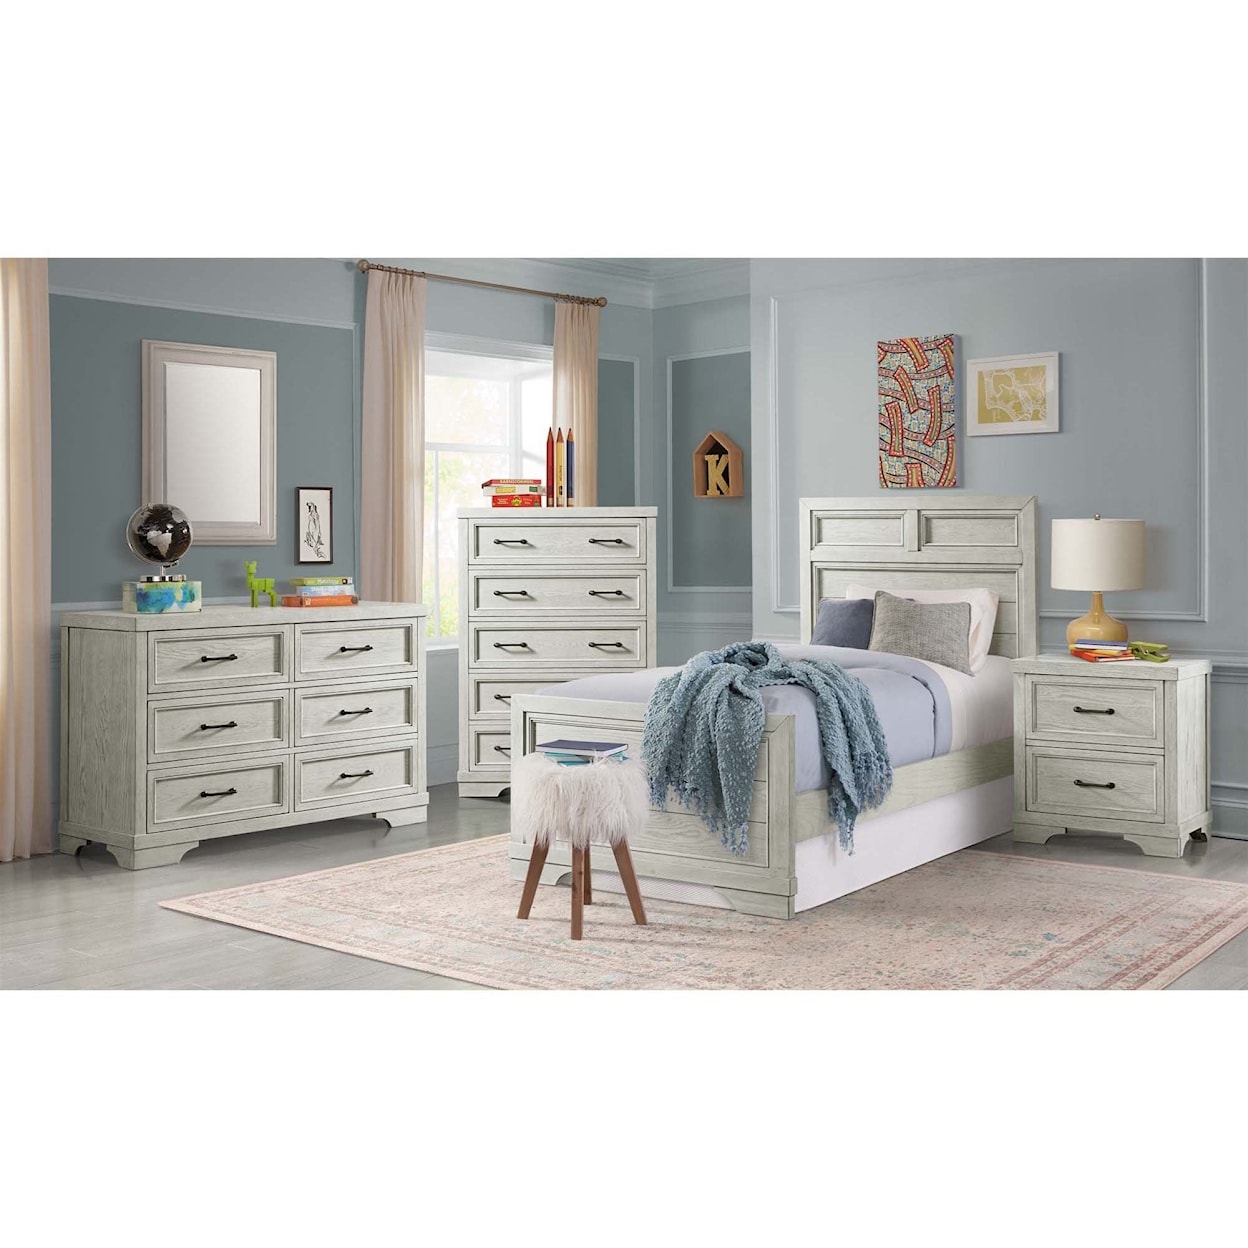 Westwood Design Foundry Twin Bedroom Group